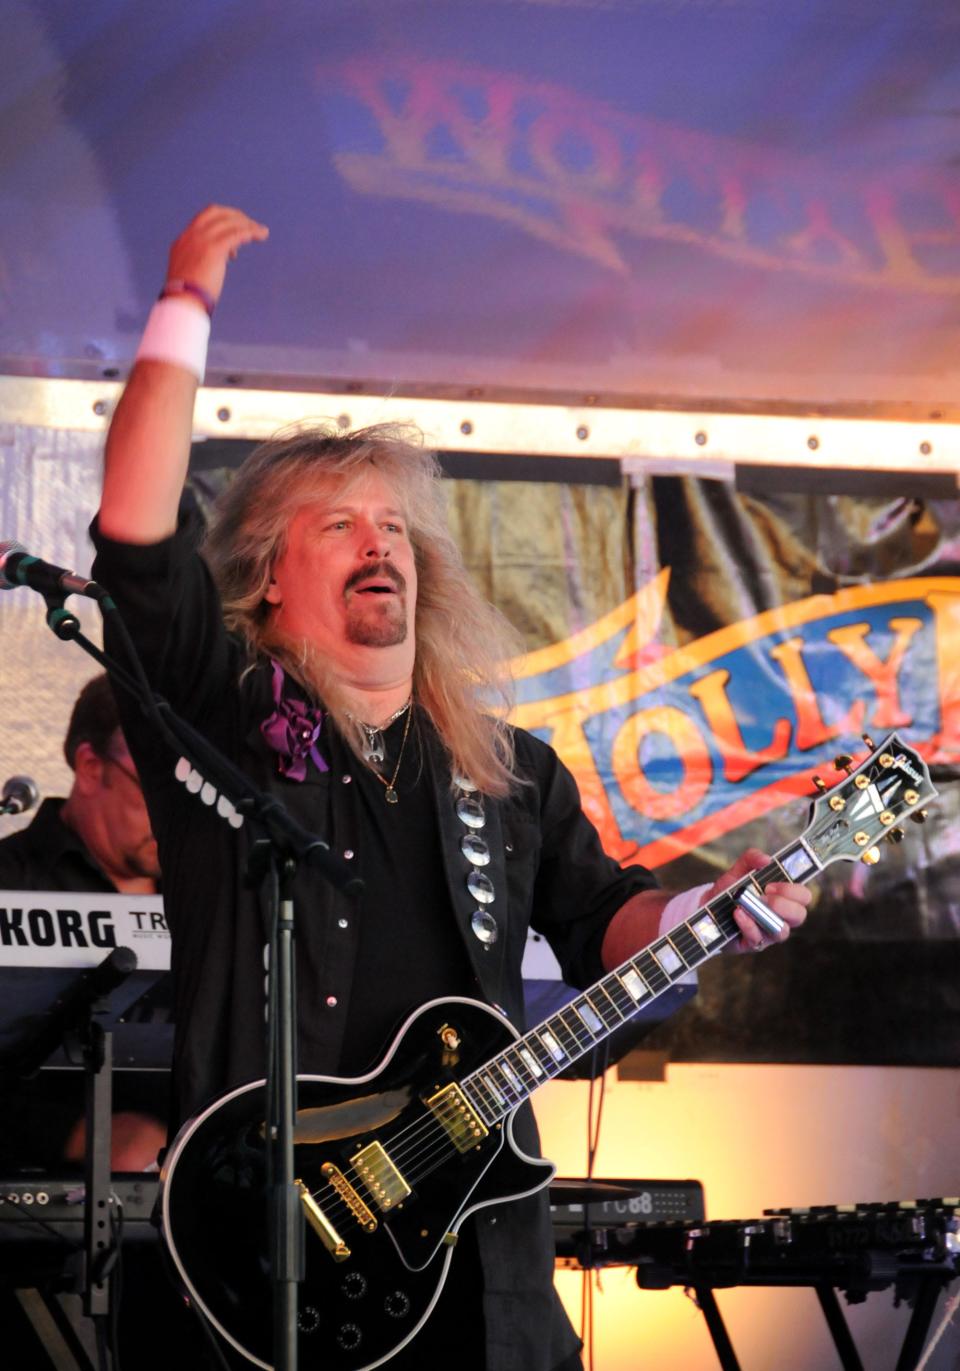 Molly Hatchet, which formed in Jacksonville, plays a show at the Ponte Vedra Concert Hall in September.